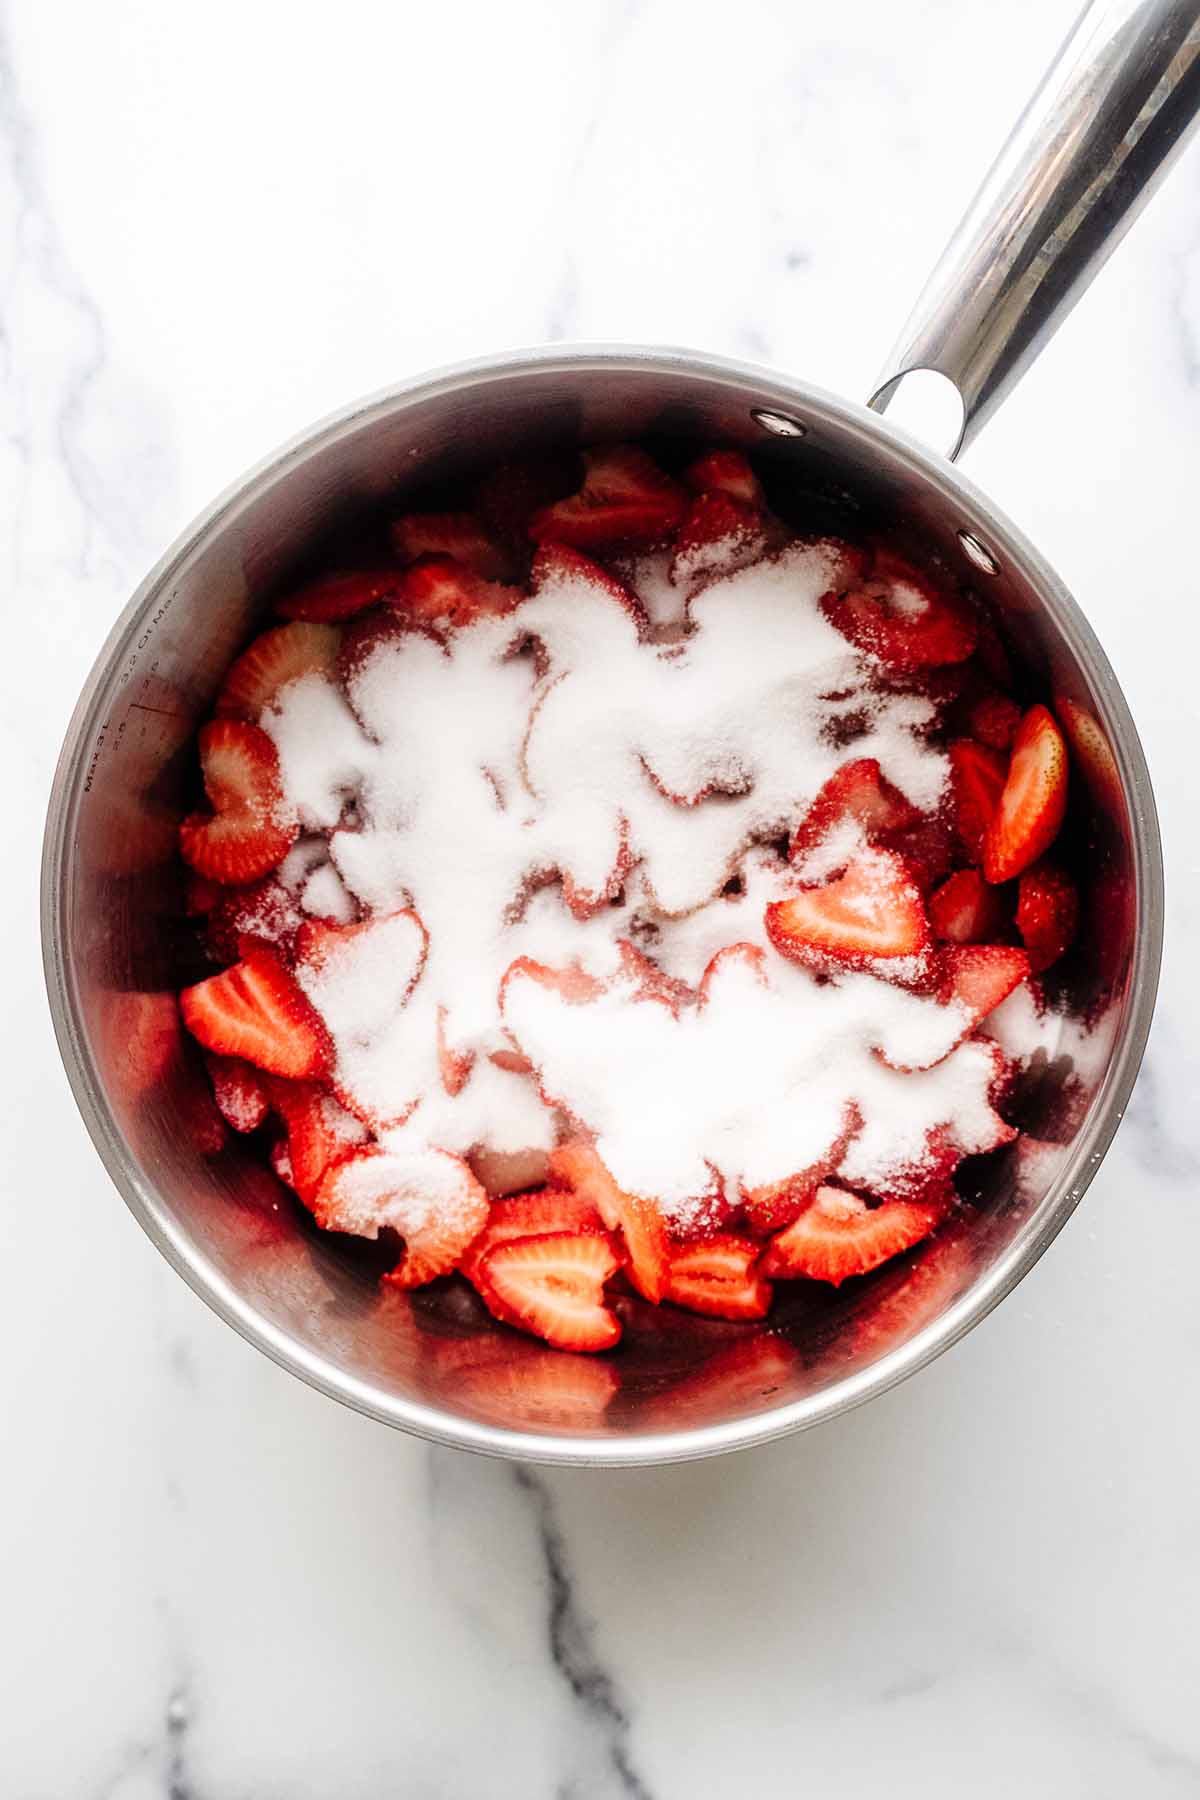 Overhead view of strawberry compote ingredients in a stainless steel saucepan